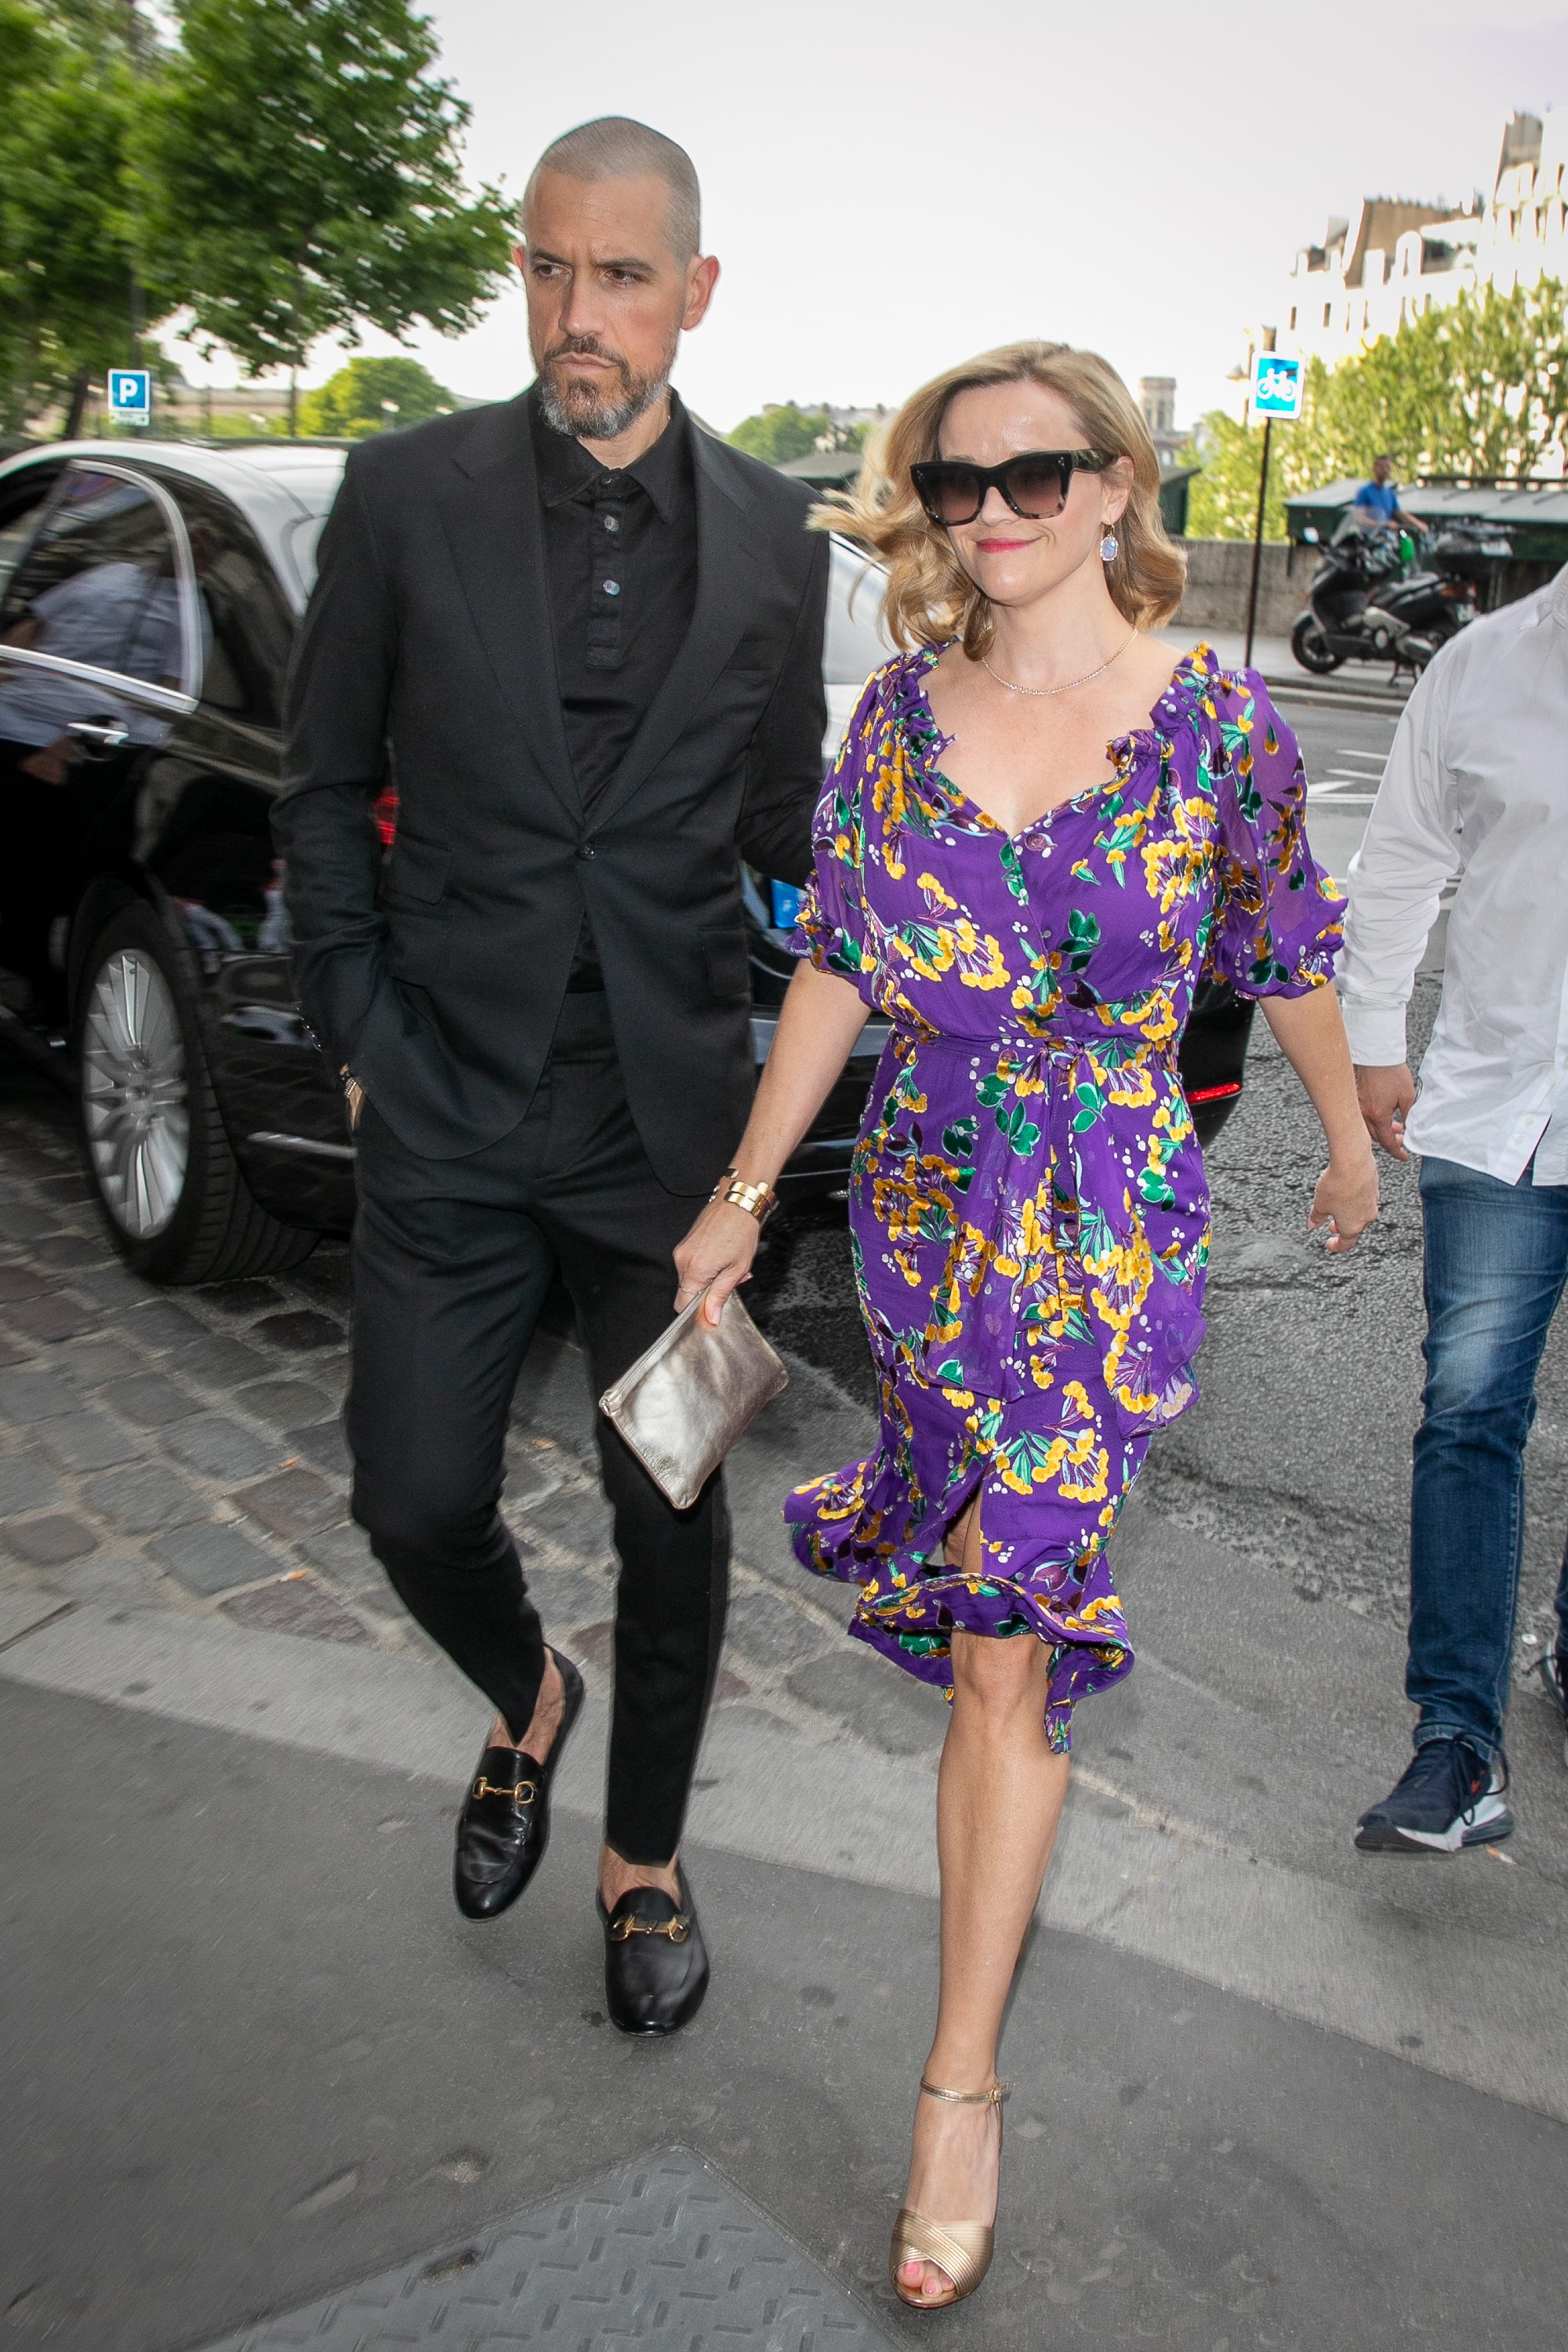 Jim Toth and actress Reese Witherspoon arrive at 'Laperouse' restaurant on June 28, 2019, in Paris, France. | Source: Getty Images